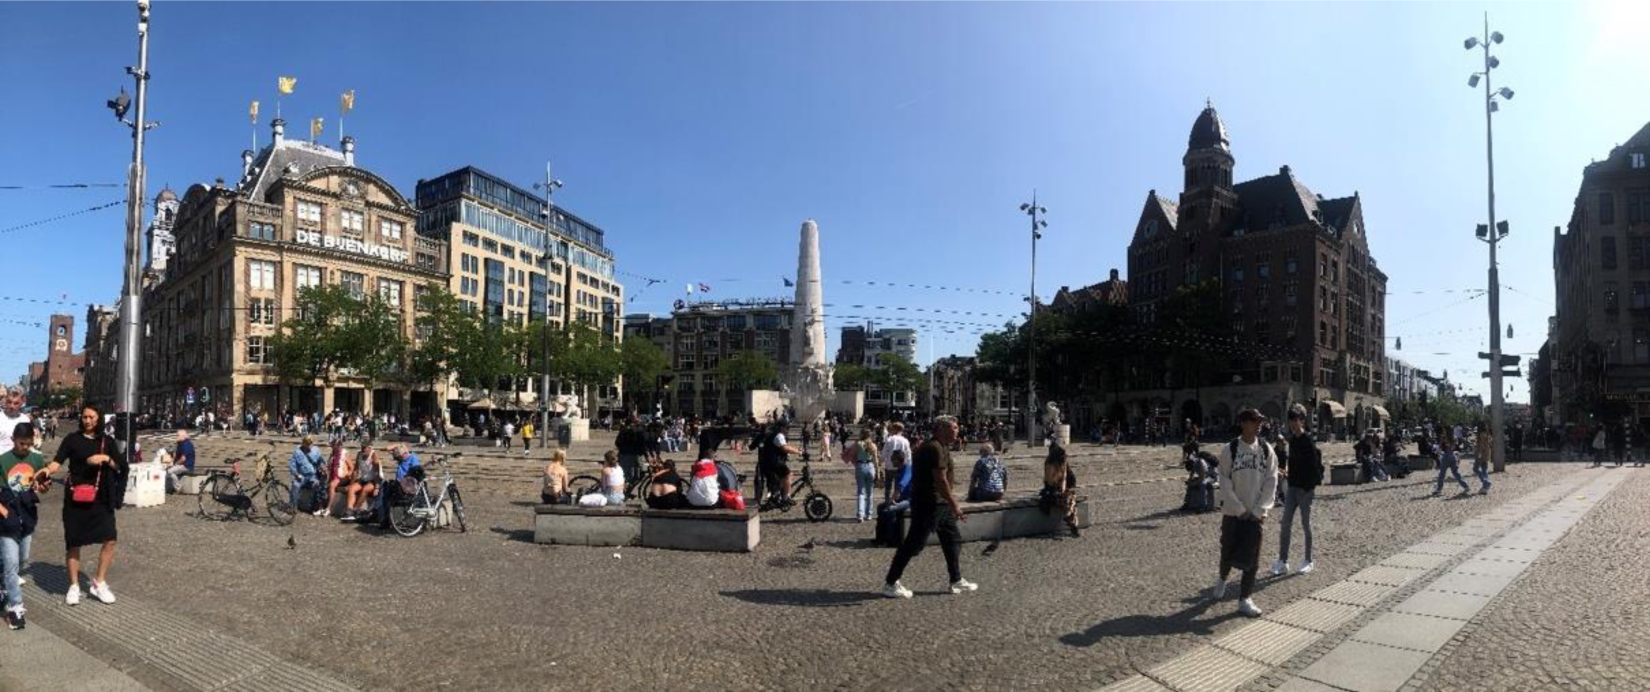 Panorama of Amsterdam's Dam Square monument and pedestrians walking by on the street. There is a bright blue sky and shopping buildings surround the square